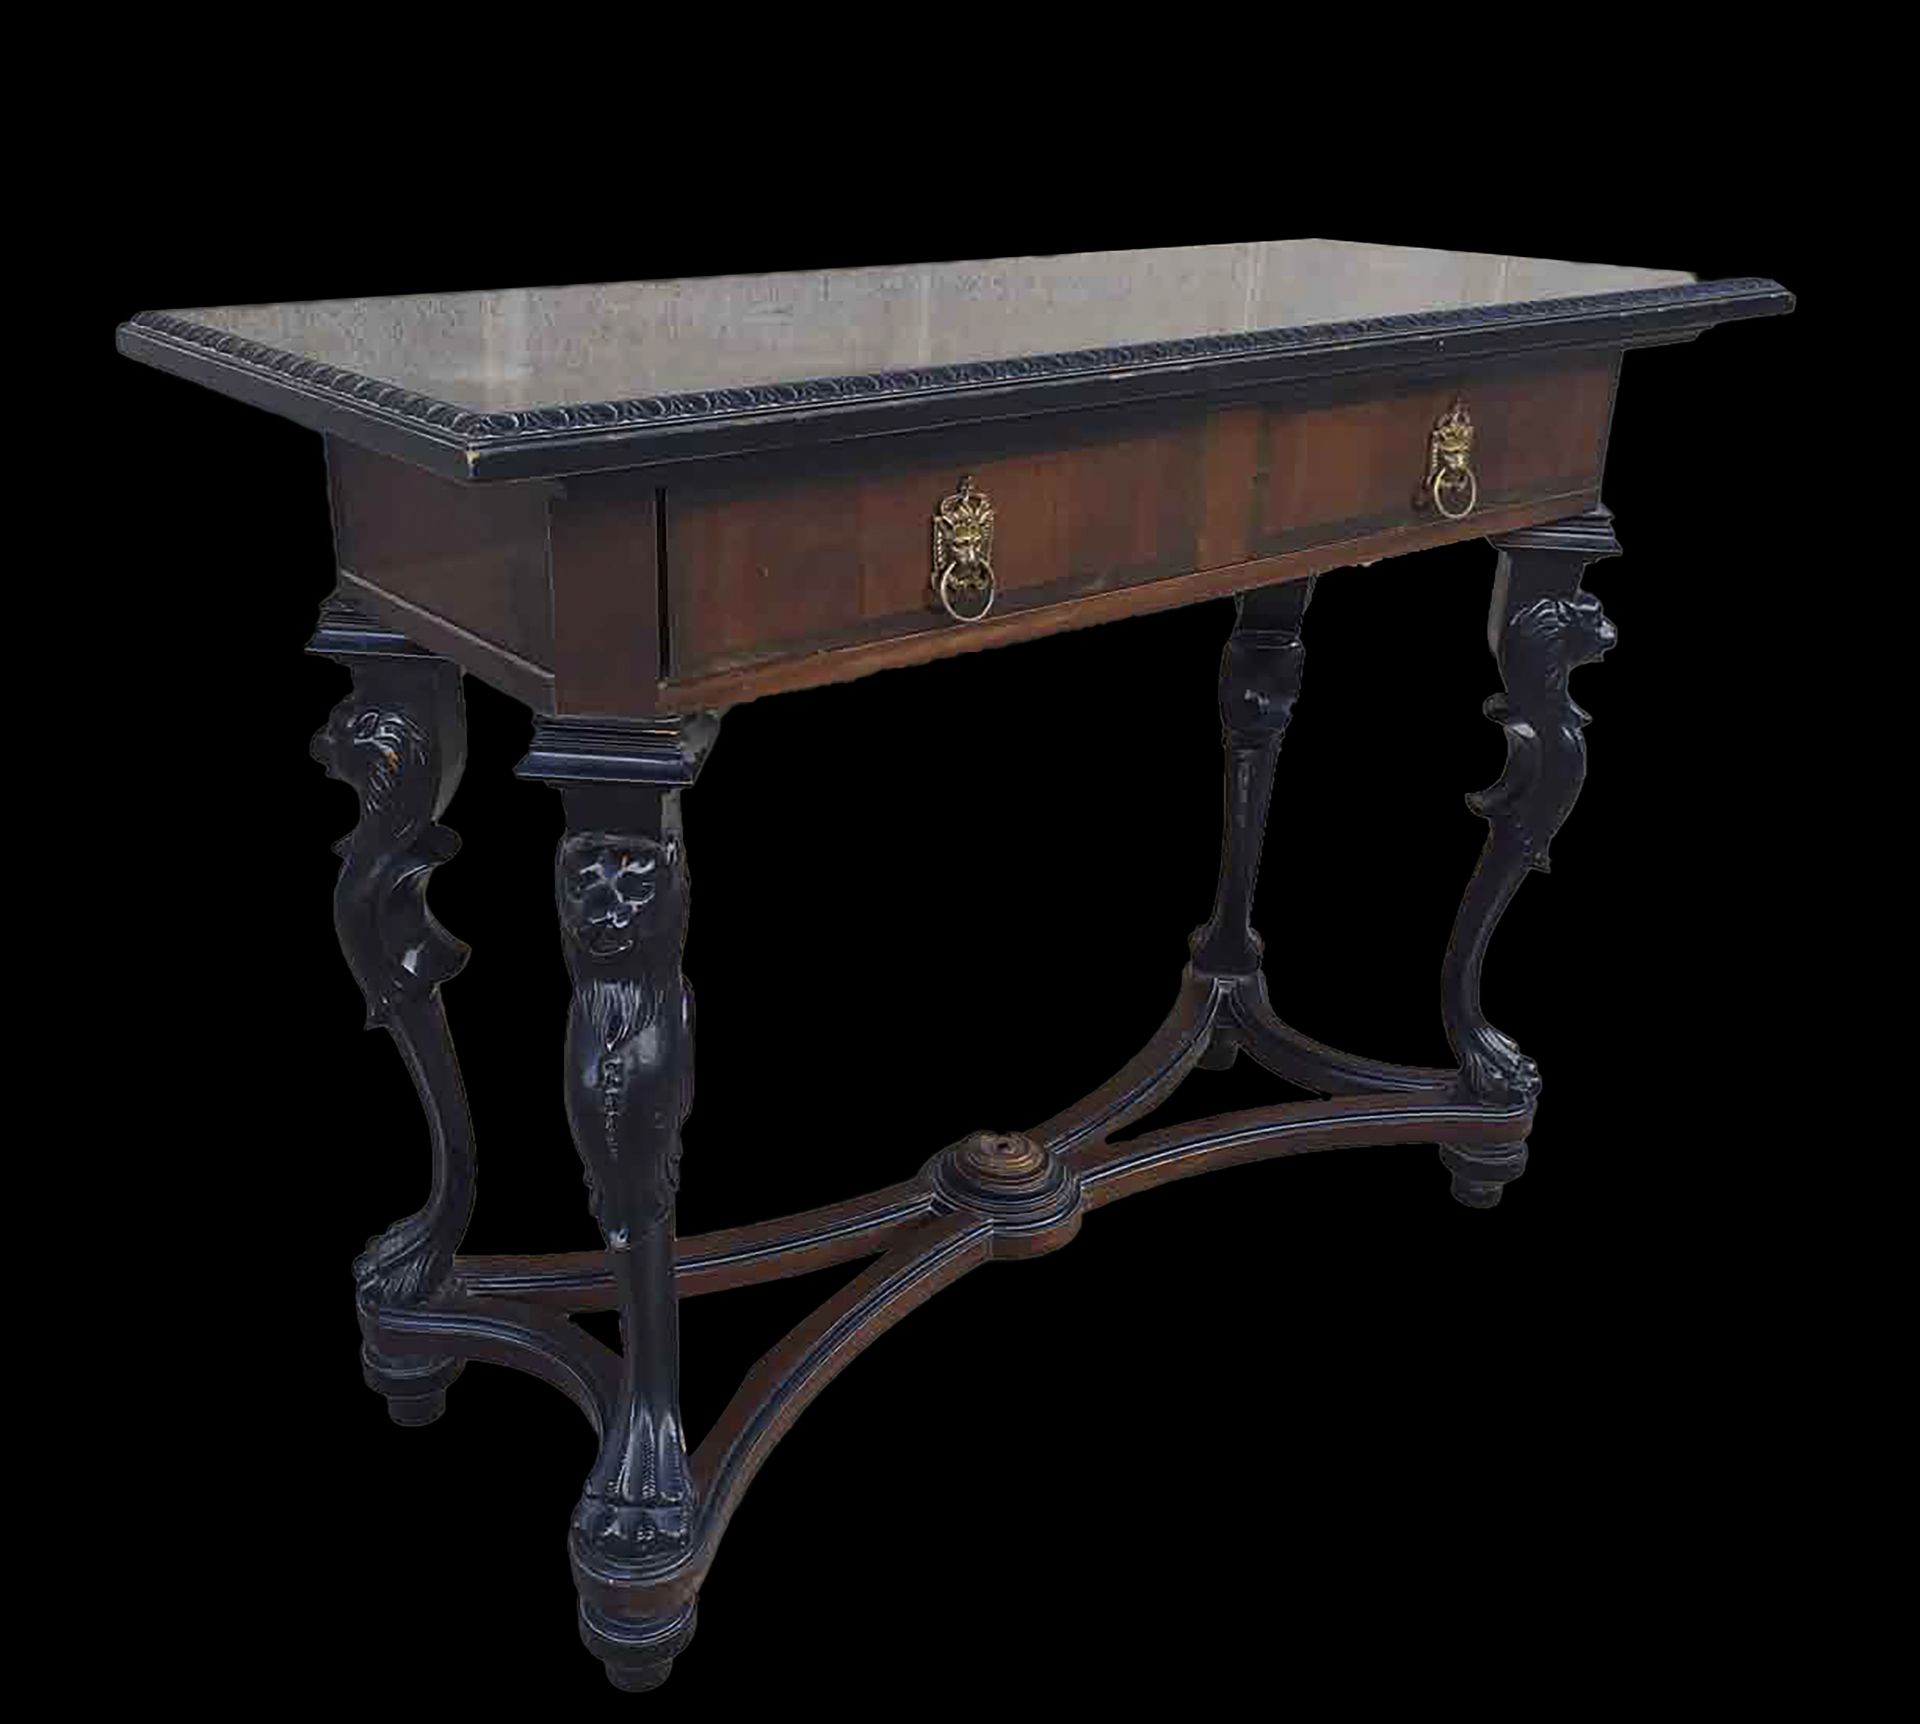 Console in rosewood and ebony marquetry enters Chippendale style, 19th century English Victorian wor - Image 4 of 5